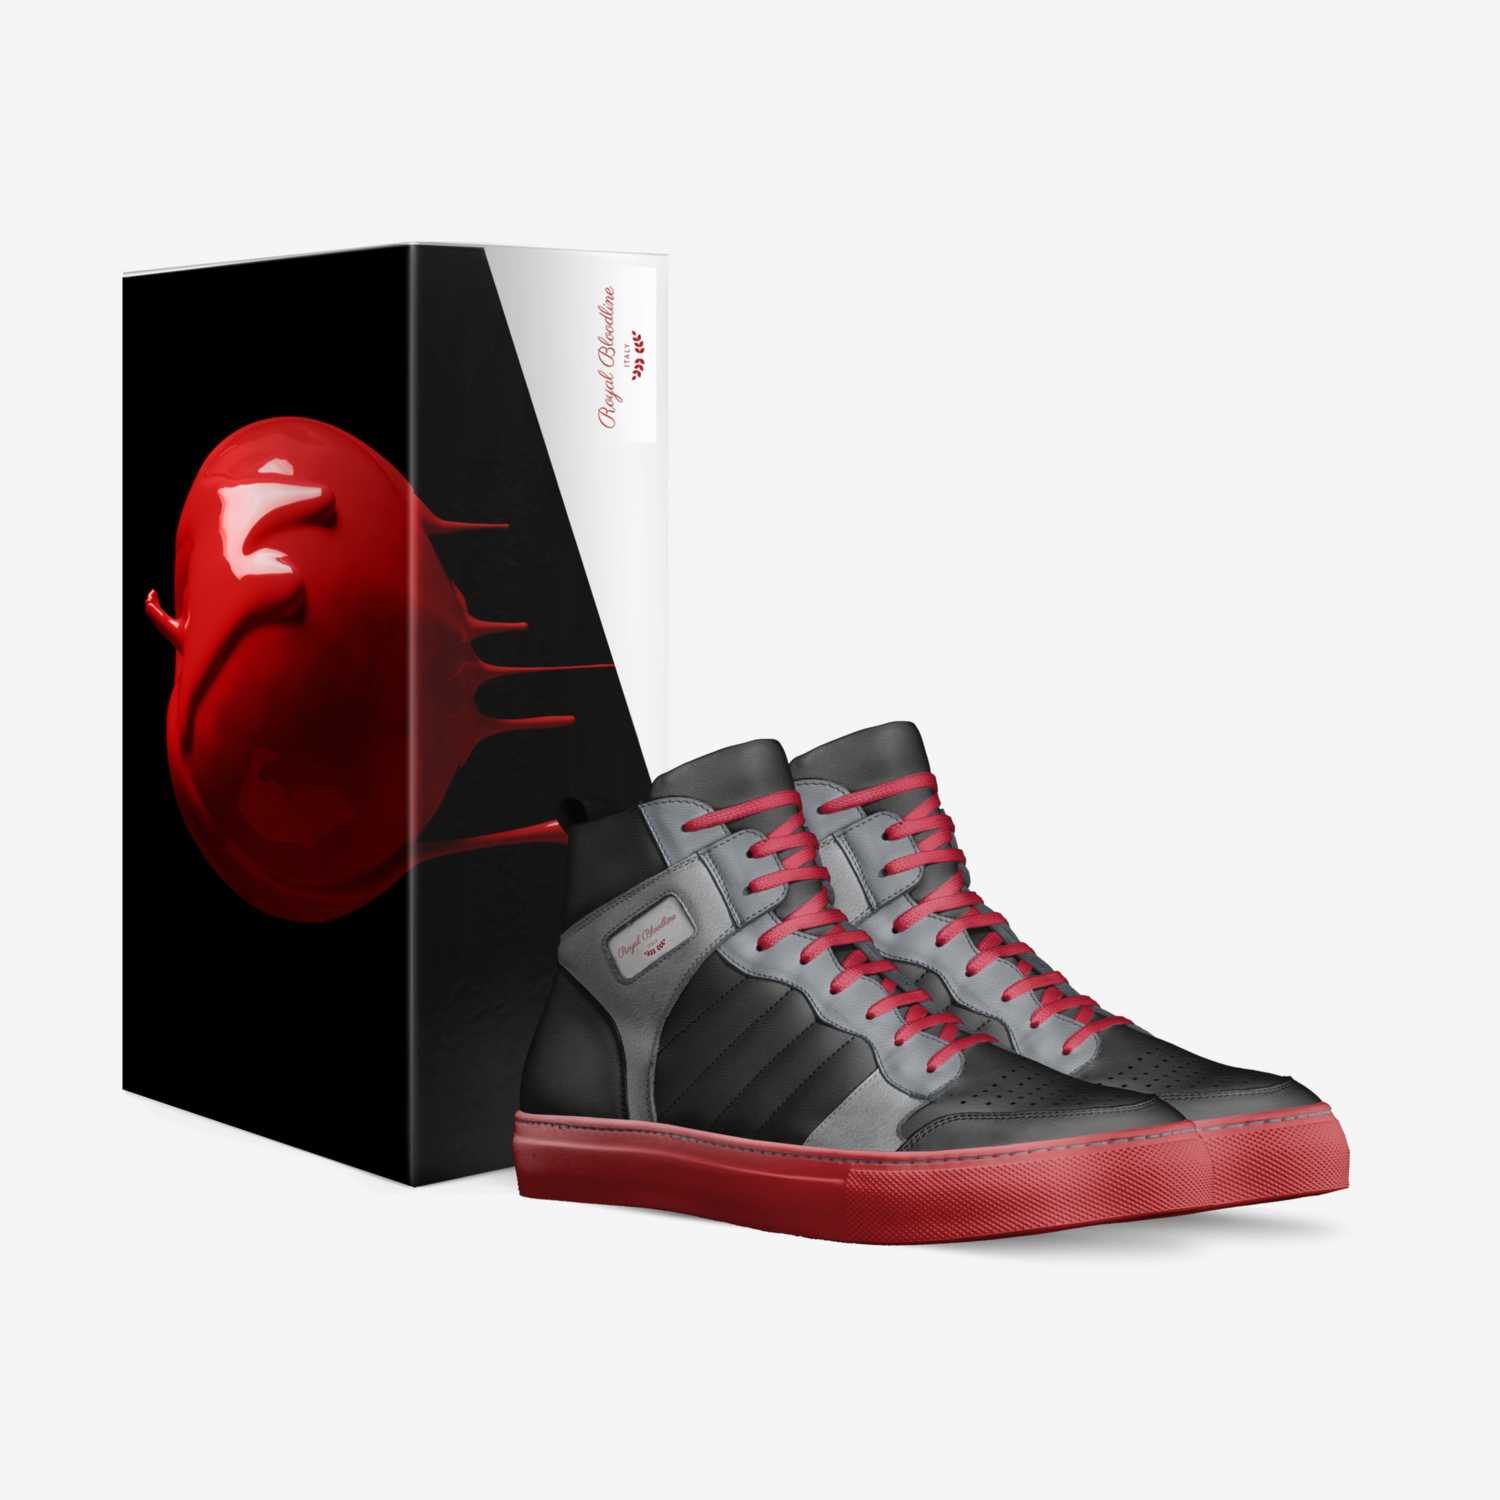 Royal Bloodline  custom made in Italy shoes by Jt Mitchum | Box view